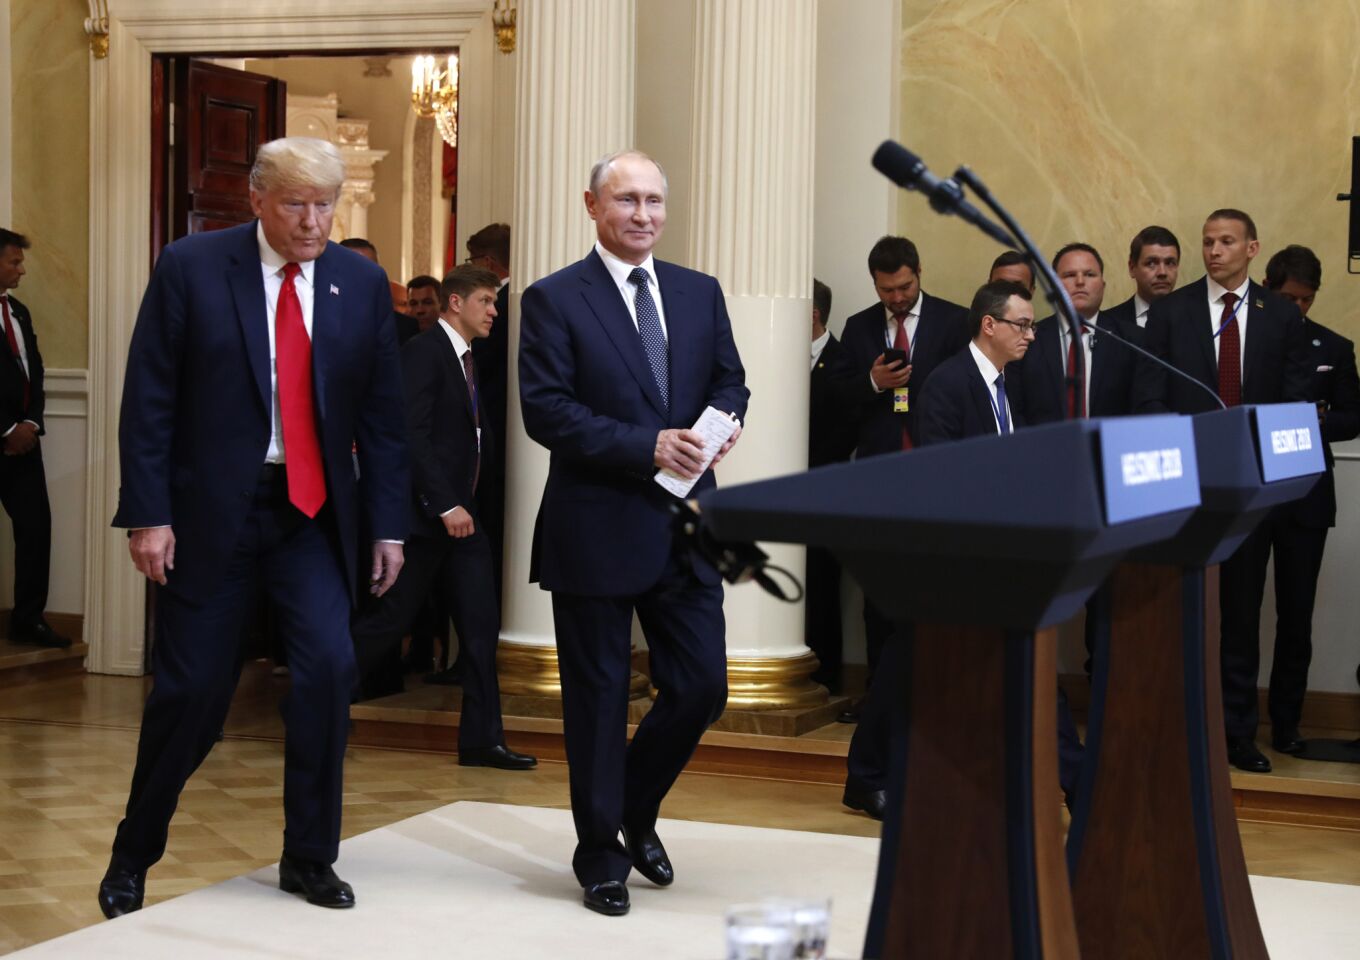 President Trump, left, and Russian President Vladimir Putin arrive for a press conference after their meeting at the Presidential Palace in Helsinki, Finland.